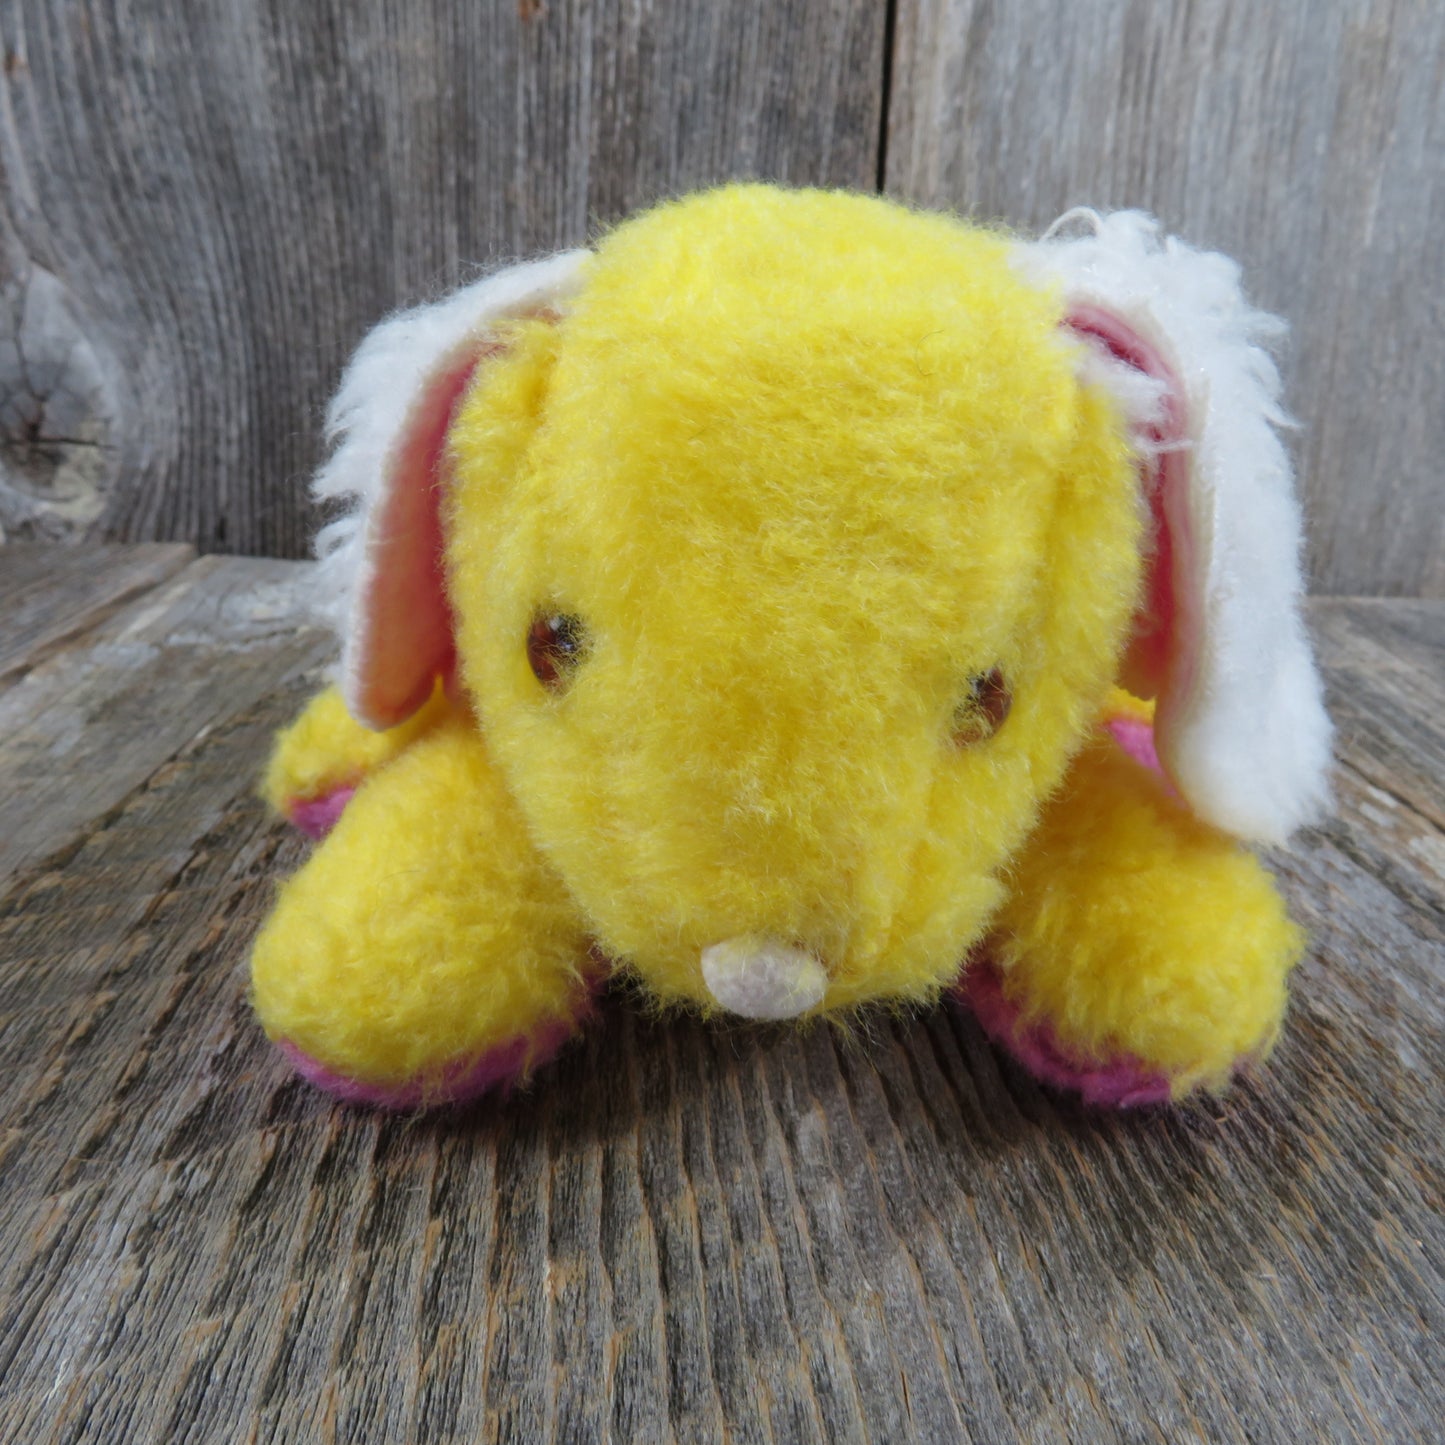 Vintage Bunny Plush Yellow Stuffed Animal Rabbit 1976 Russ Fuzzy Wuzzy Easter Pink Gravel Filled - At Grandma's Table